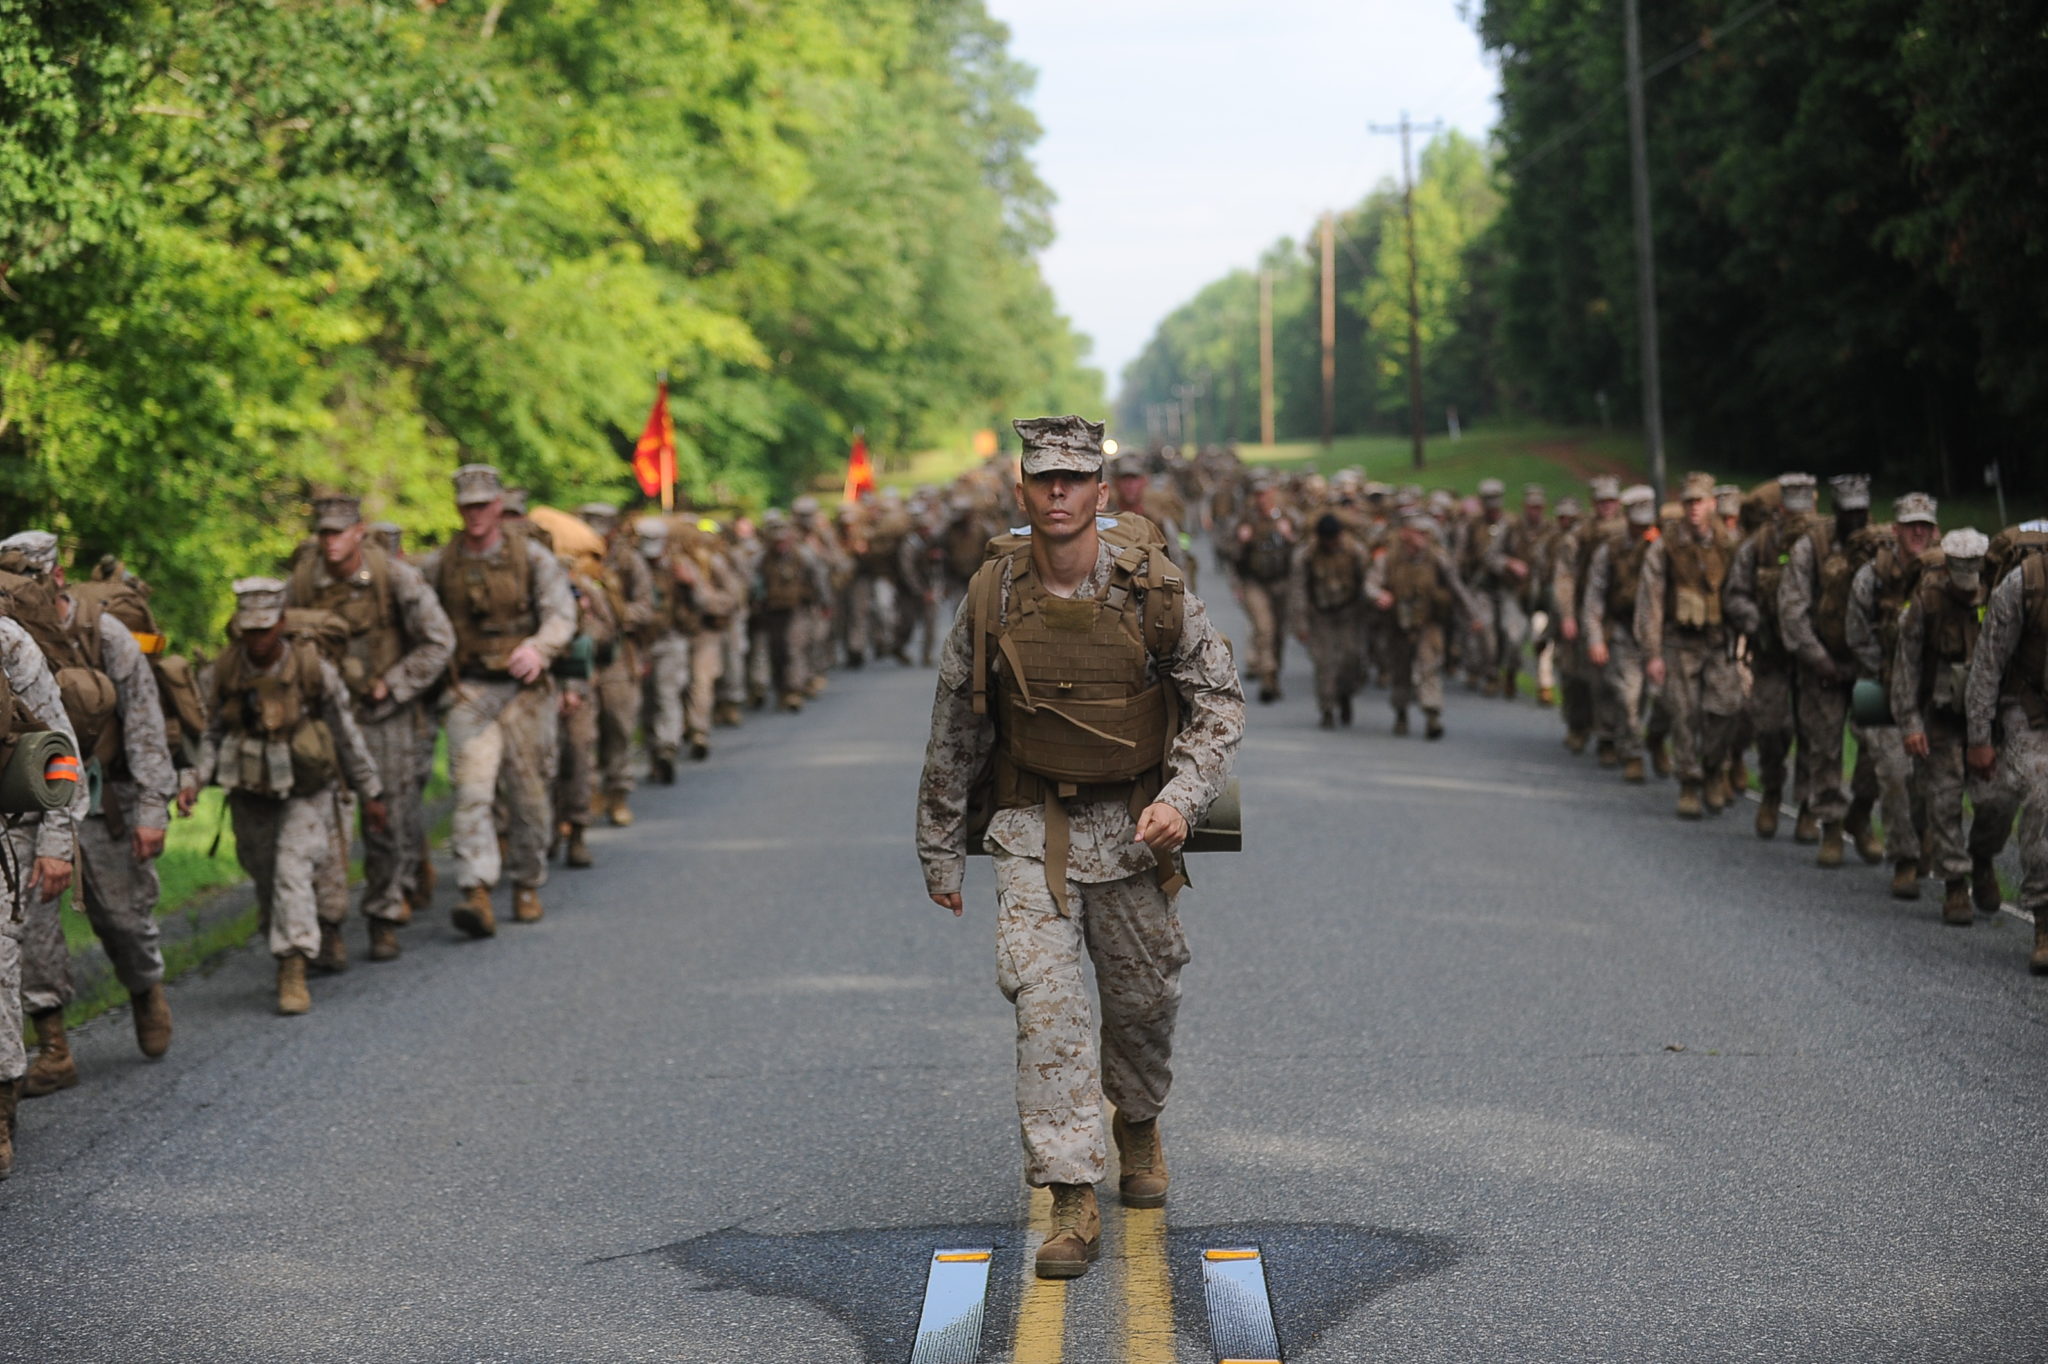 TBS Q&A from a Marine Captain Instructor - Officer Candidates School Guide